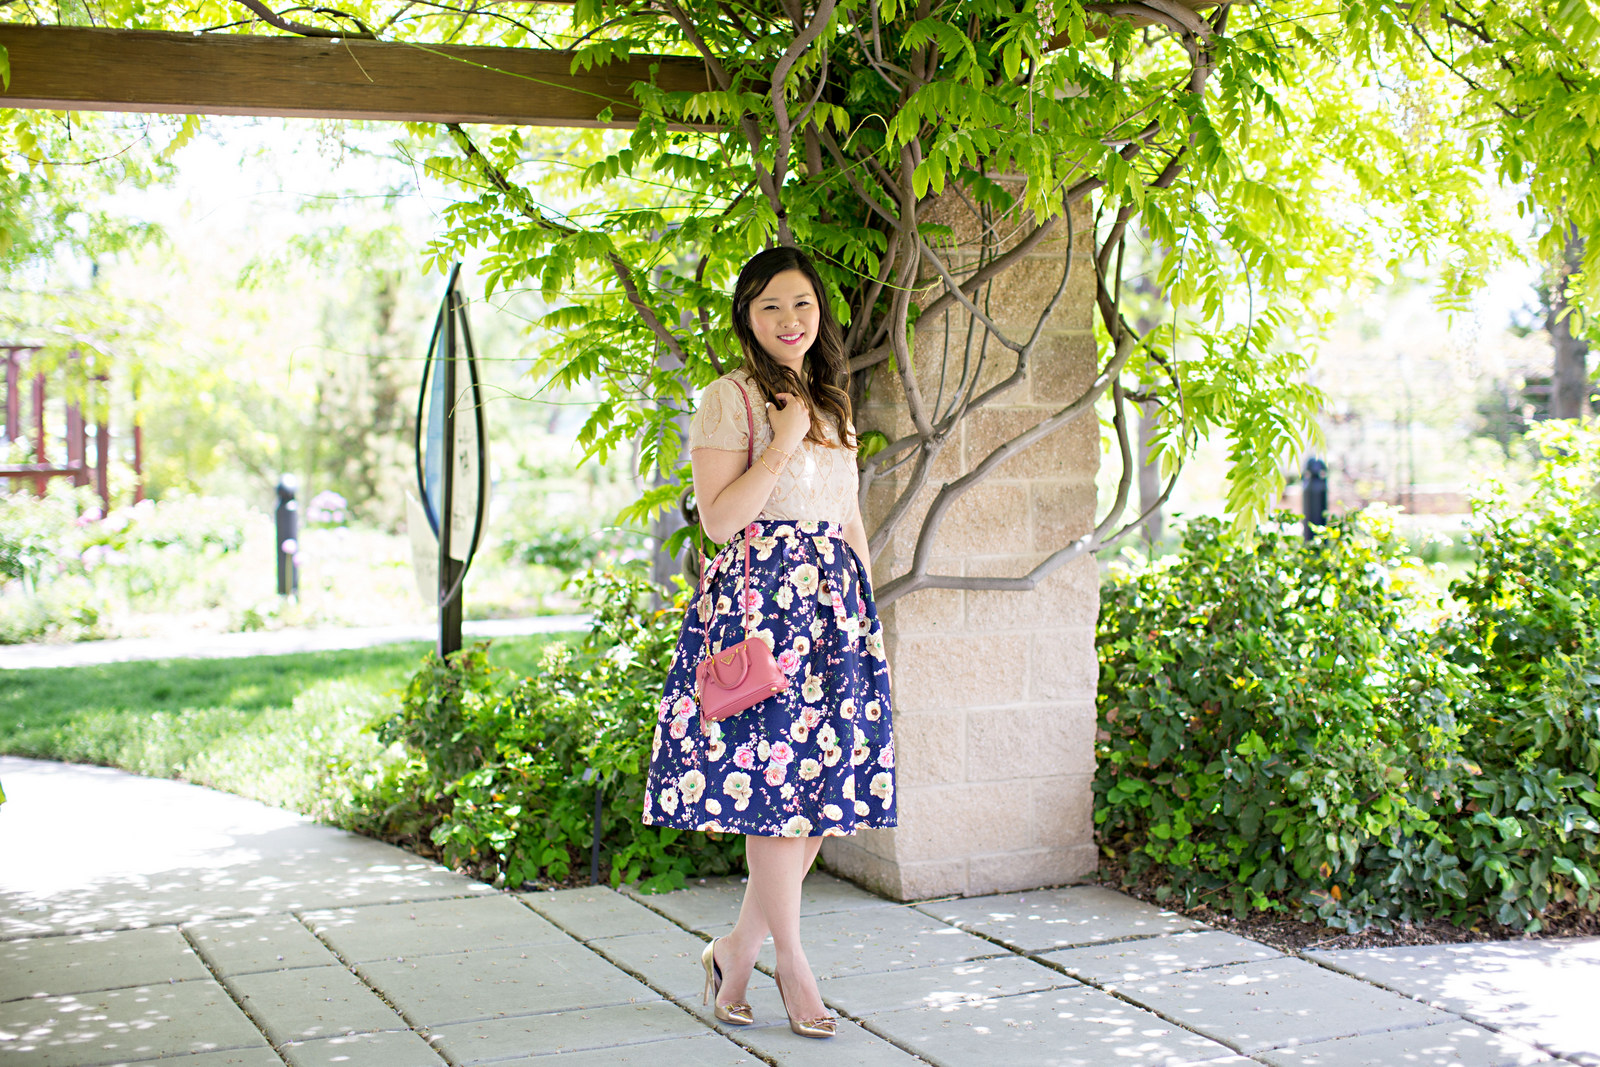 How to style a floral skirt